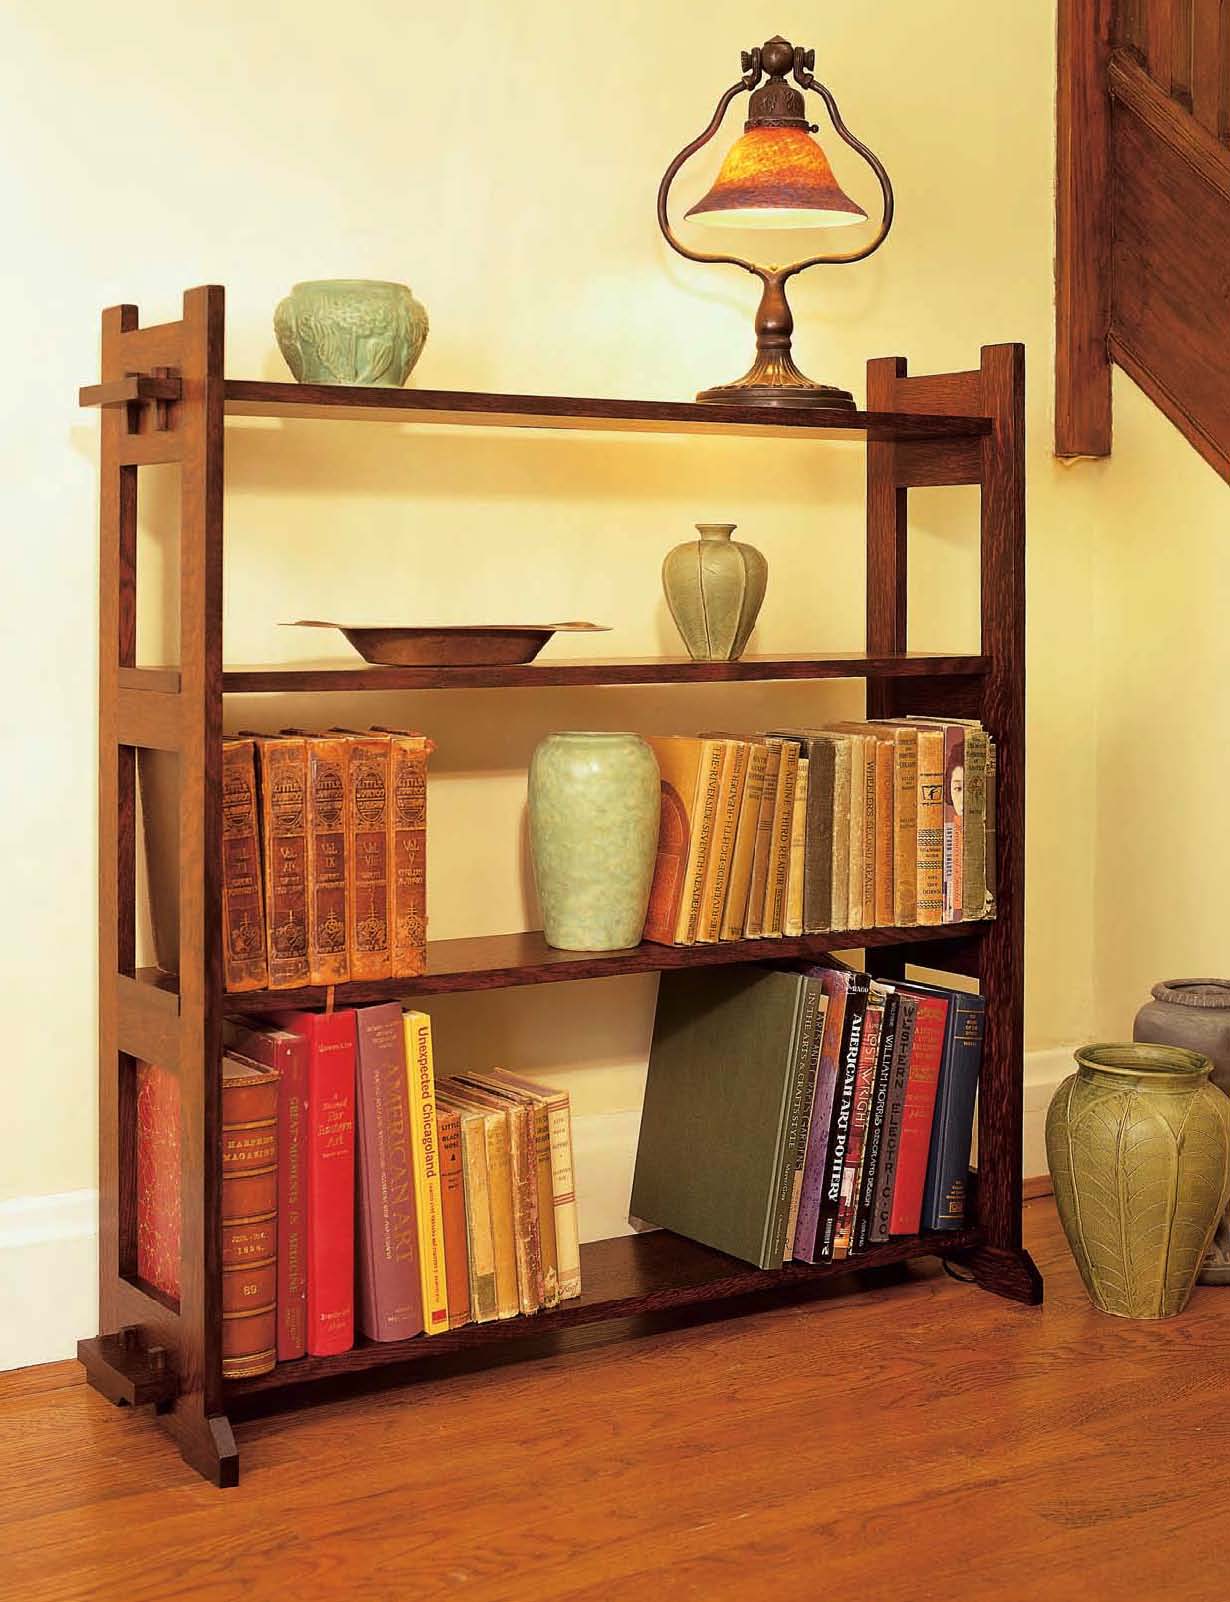 The 100 Best Shelving Storage Projects - Popular